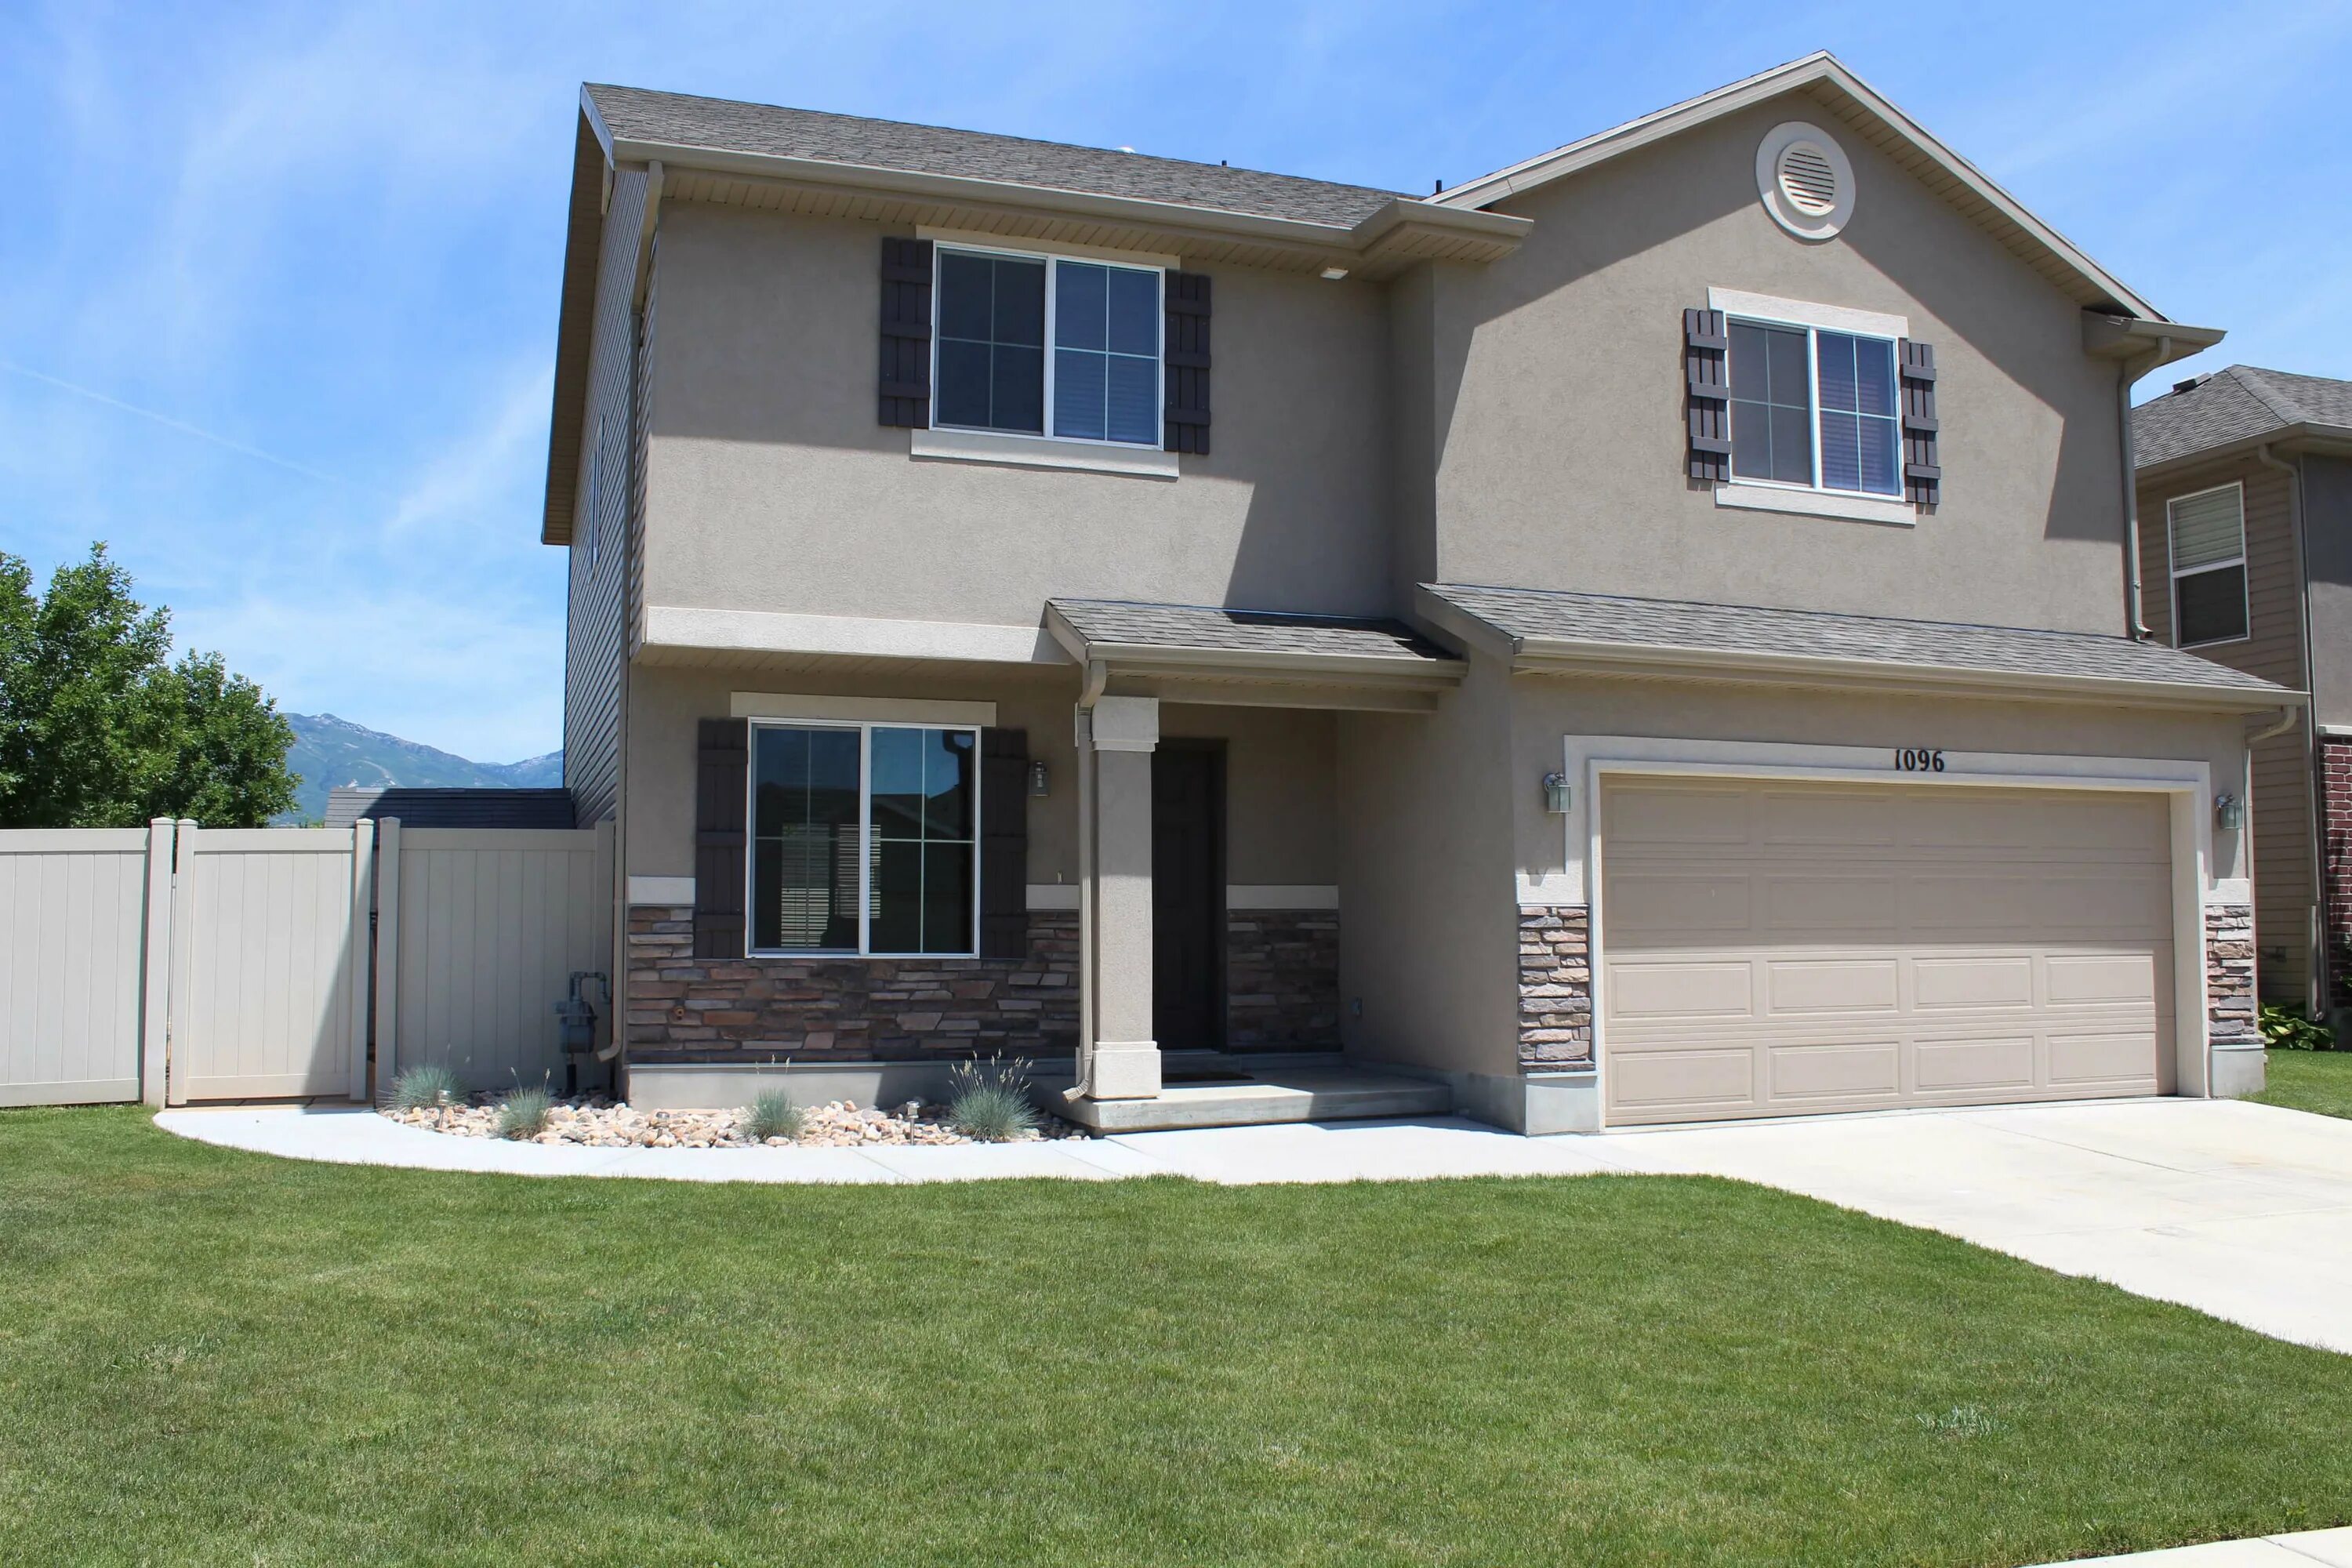 Single family. Single Family Home. Houses in Utah. House for rent. Typical Single Family House.